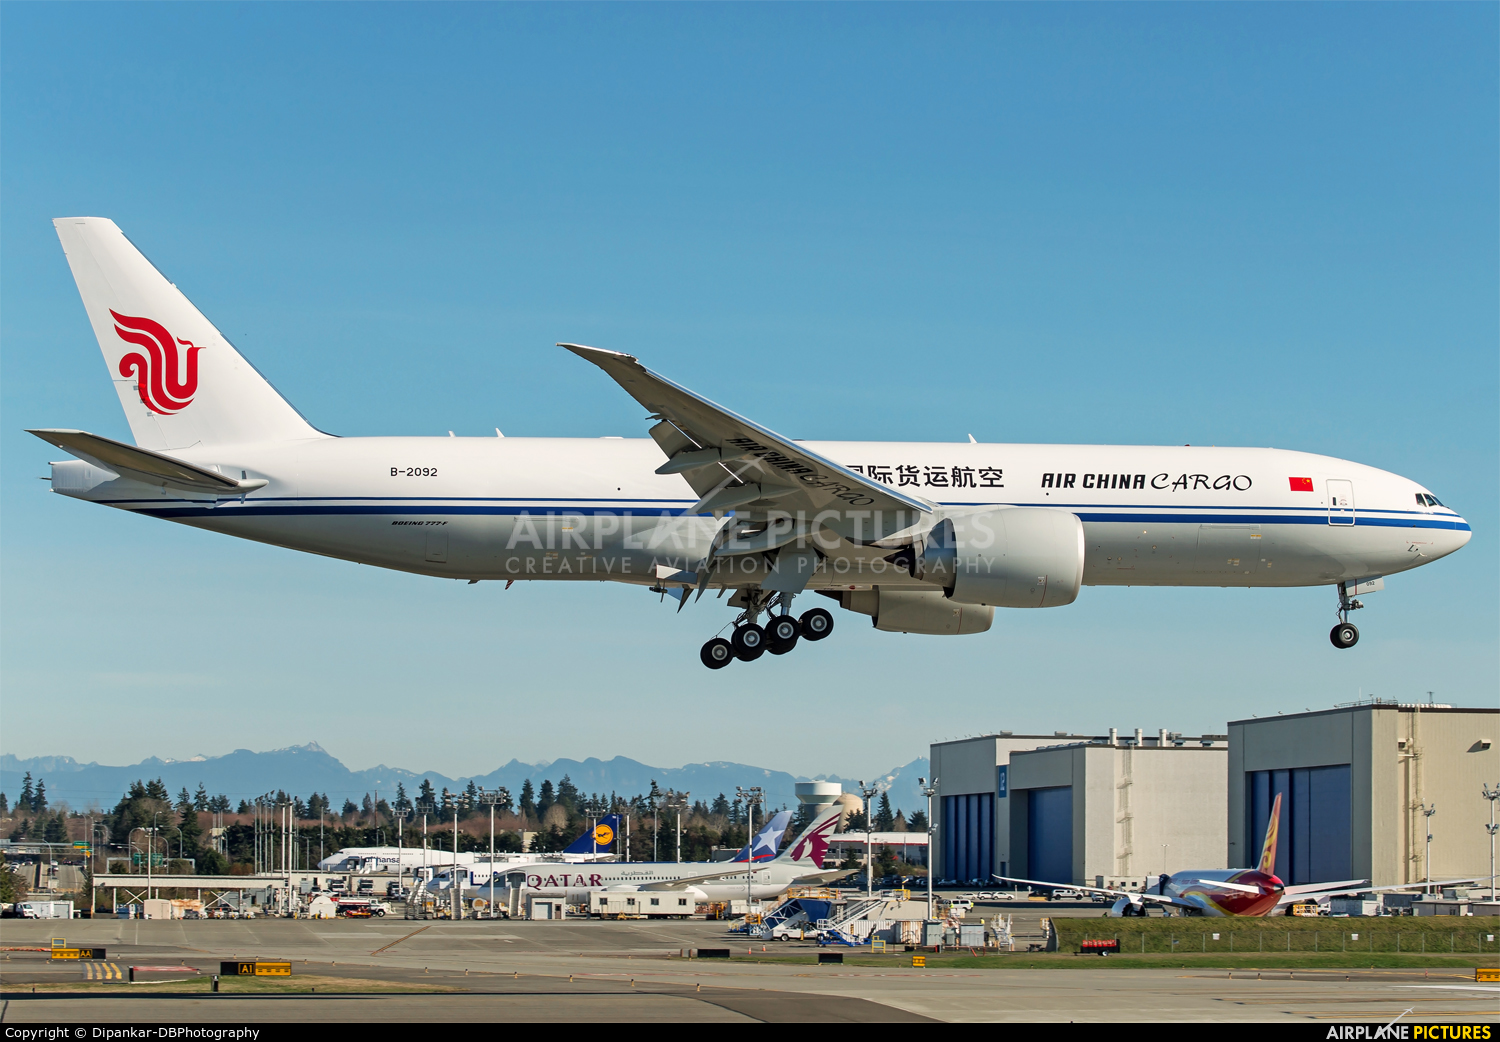 Air China Cargo B-2092 aircraft at Everett - Snohomish County / Paine Field